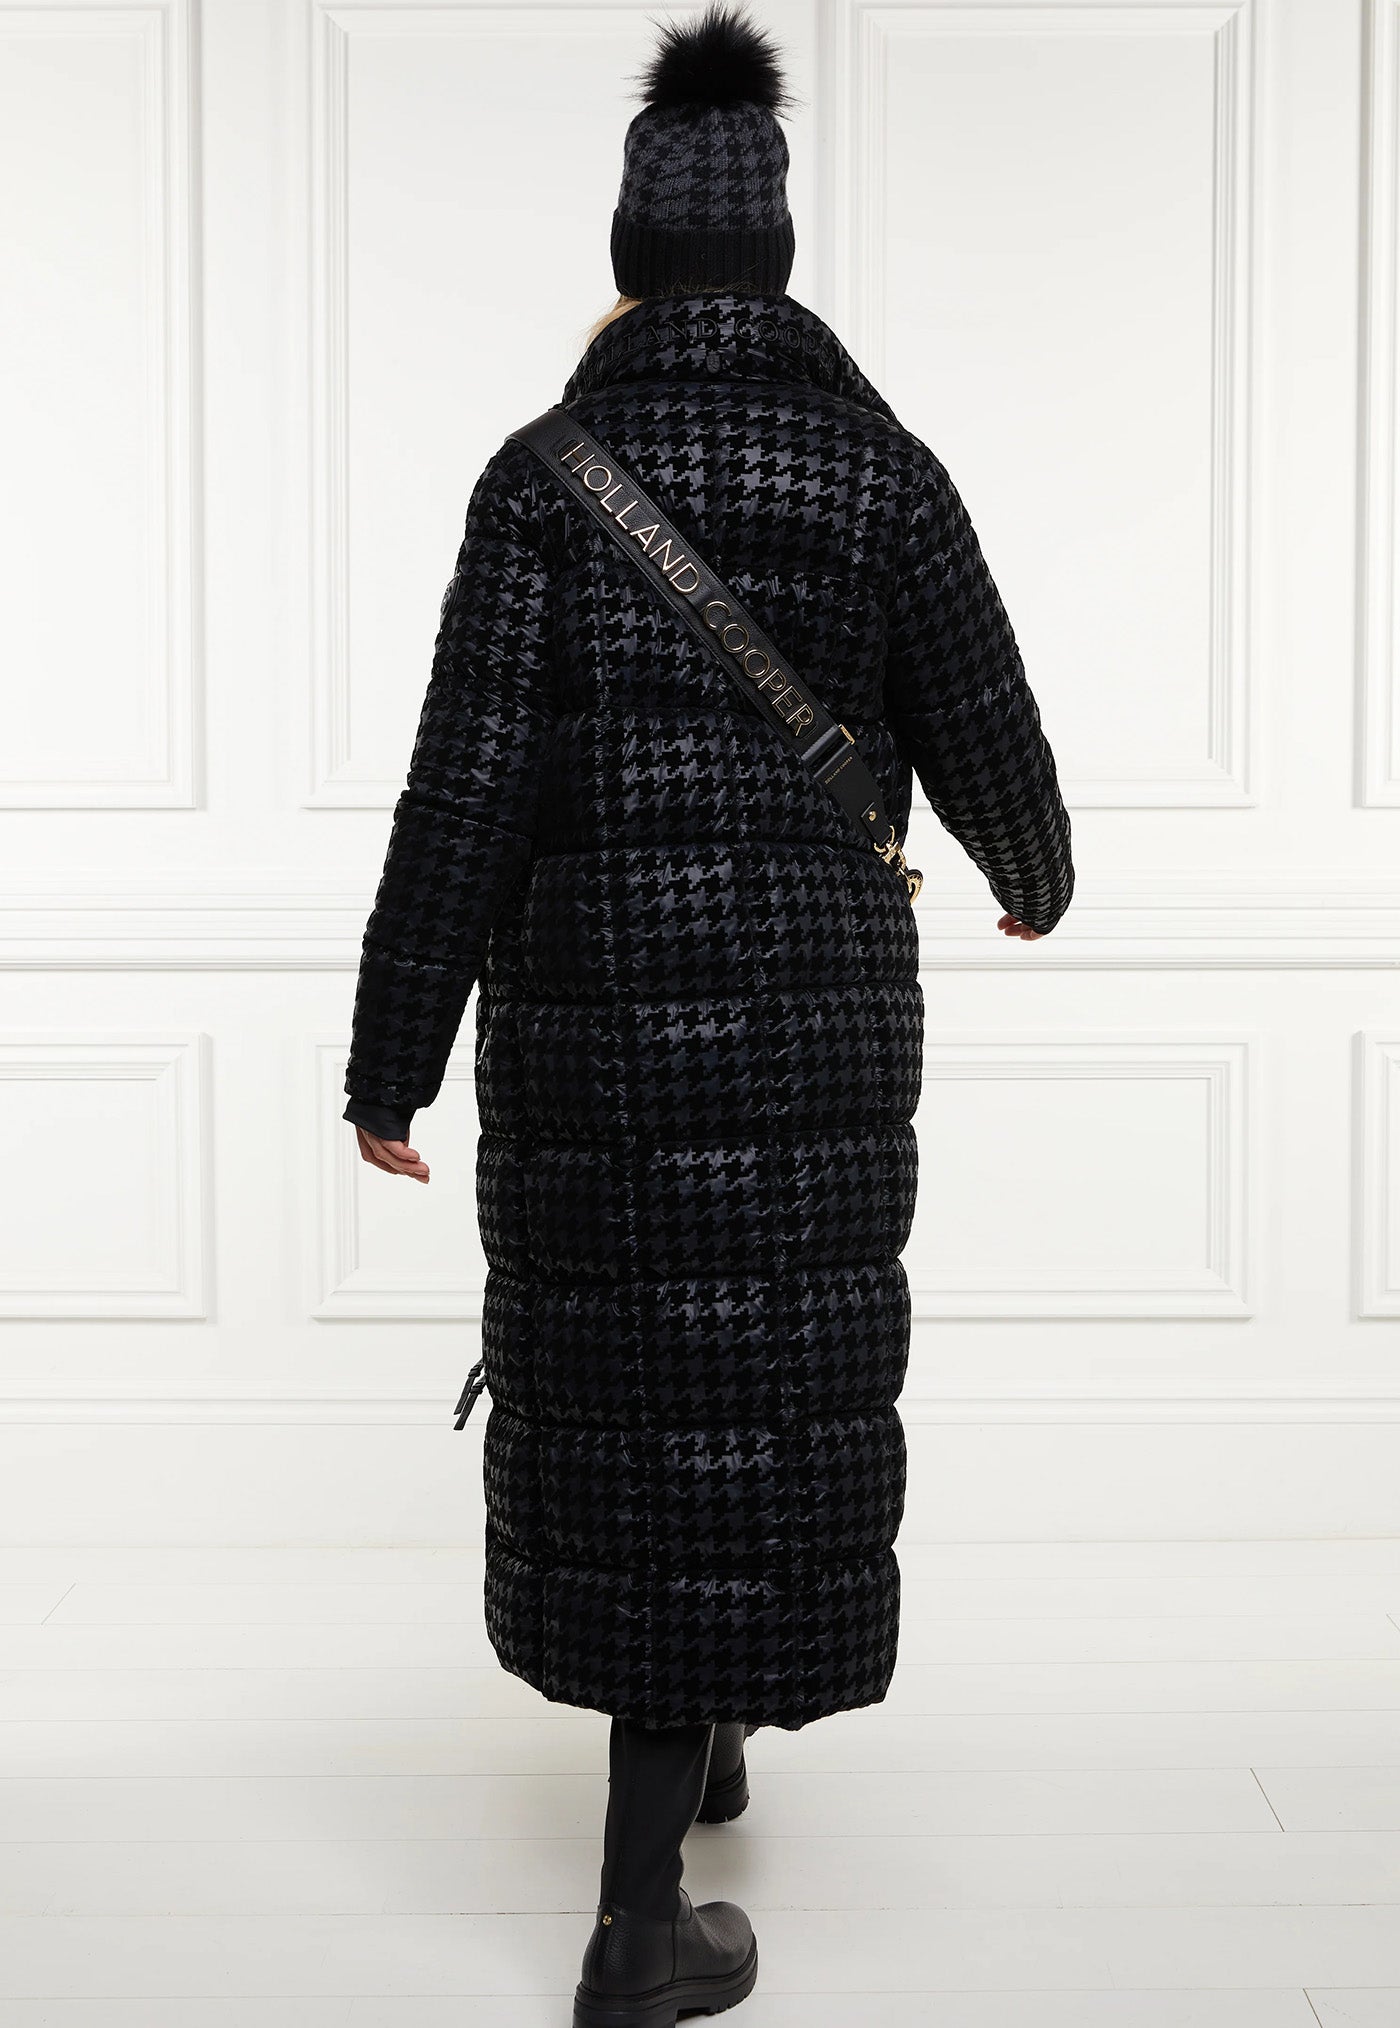 Crawford Longline Coat - Mono Houndstooth sold by Angel Divine